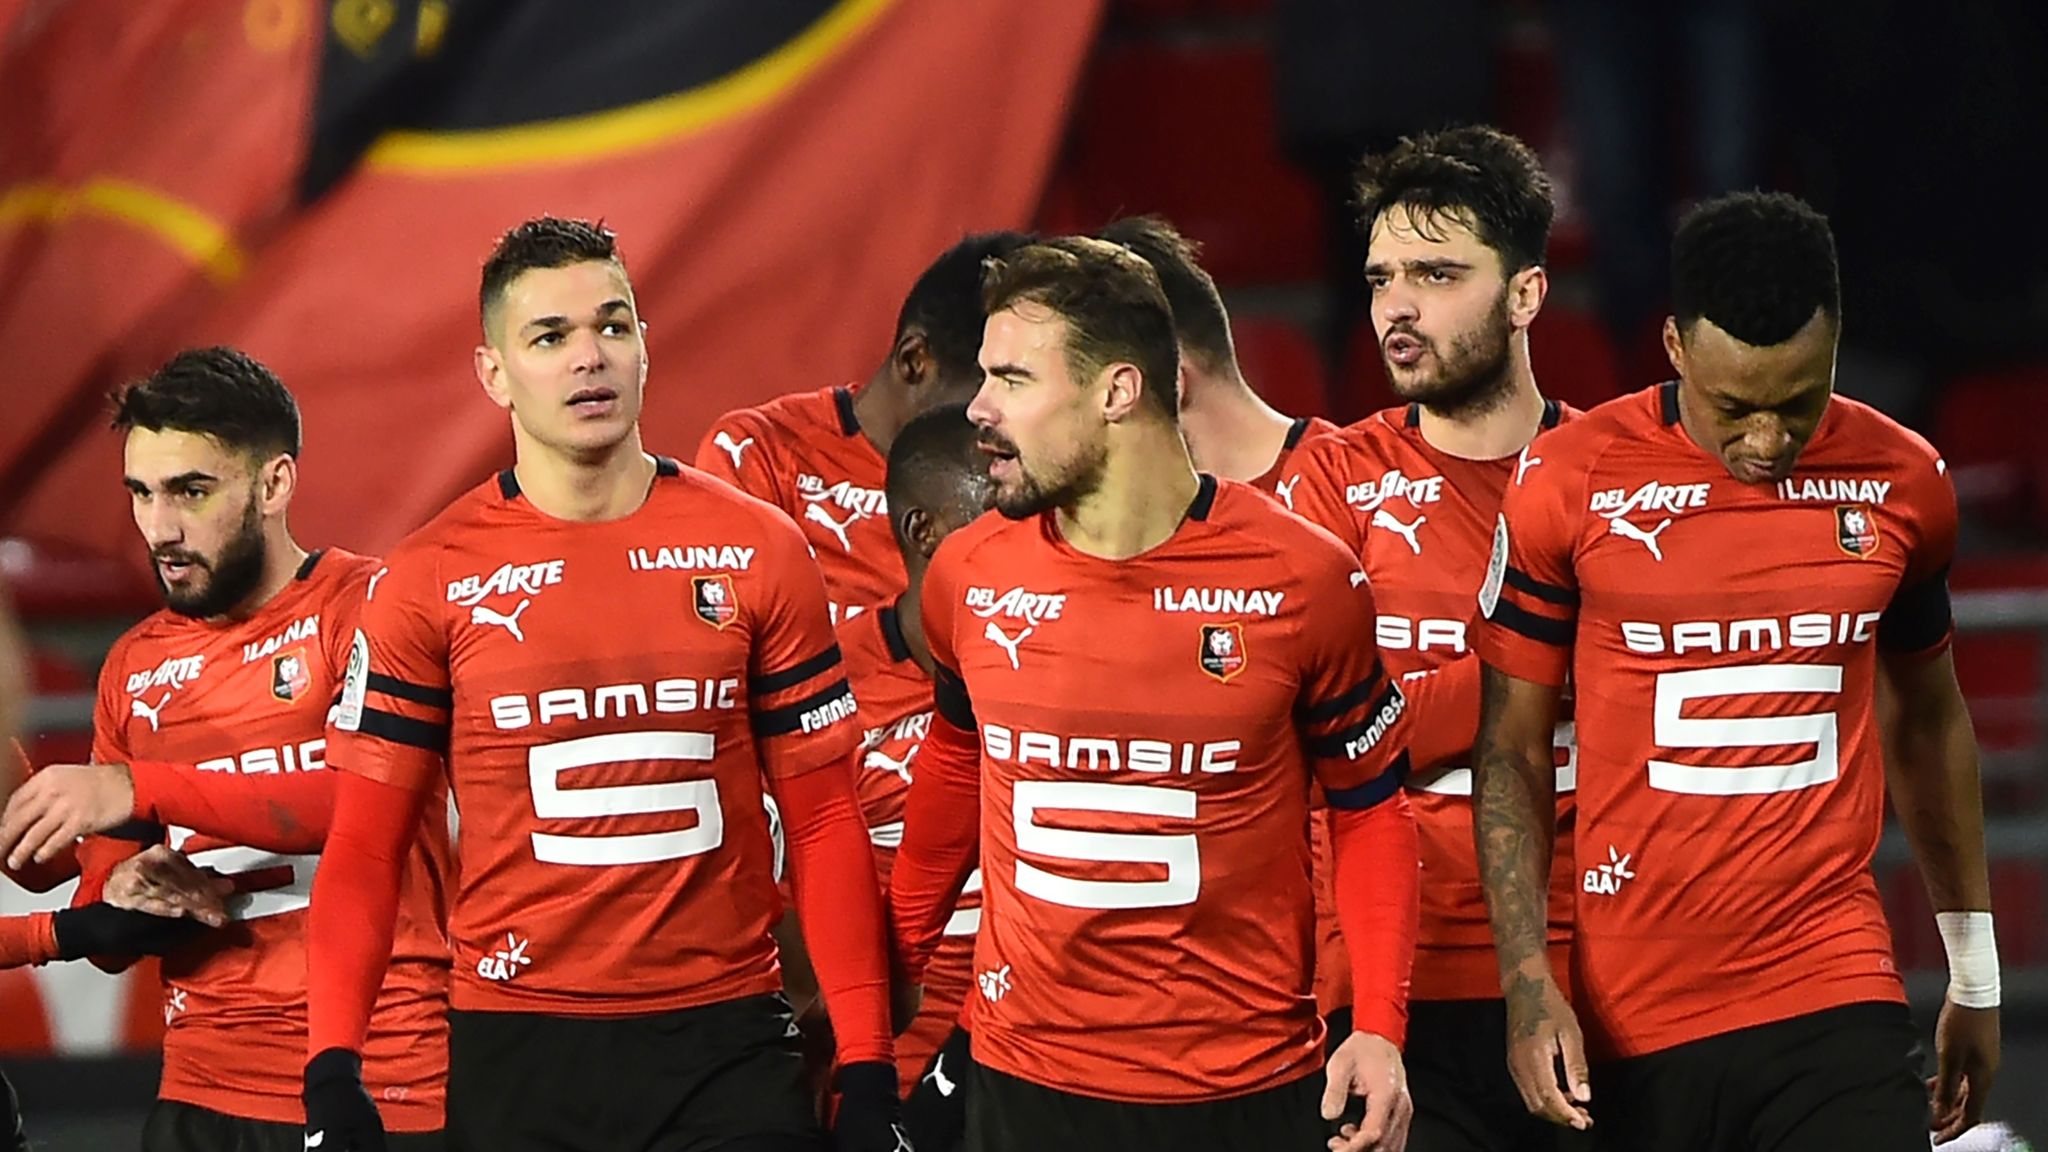 Grazen Regeneratie vriendelijk Rennes vs Nimes called off as Ligue 1 give club extra time to prepare for  Arsenal in Europa League | Football News | Sky Sports